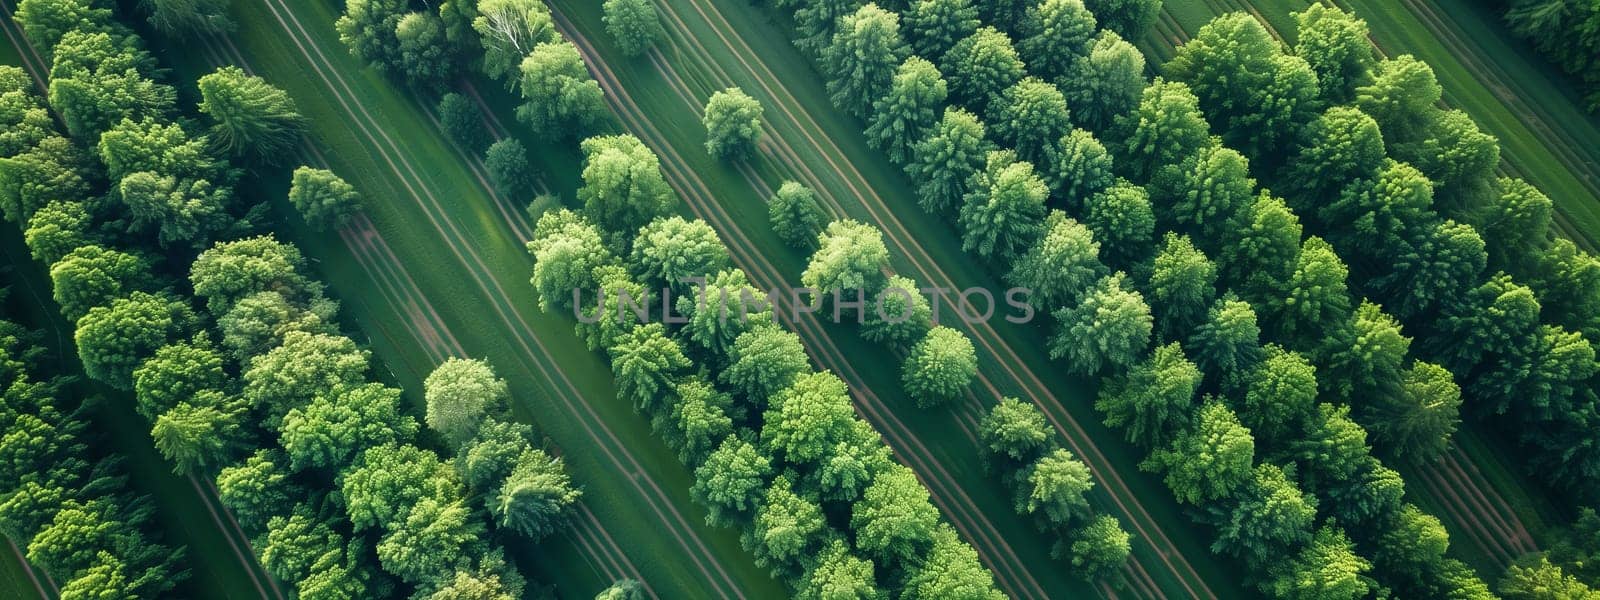 A picturesque landscape of rows of trees planted in a field, creating a beautiful pattern from an aerial view